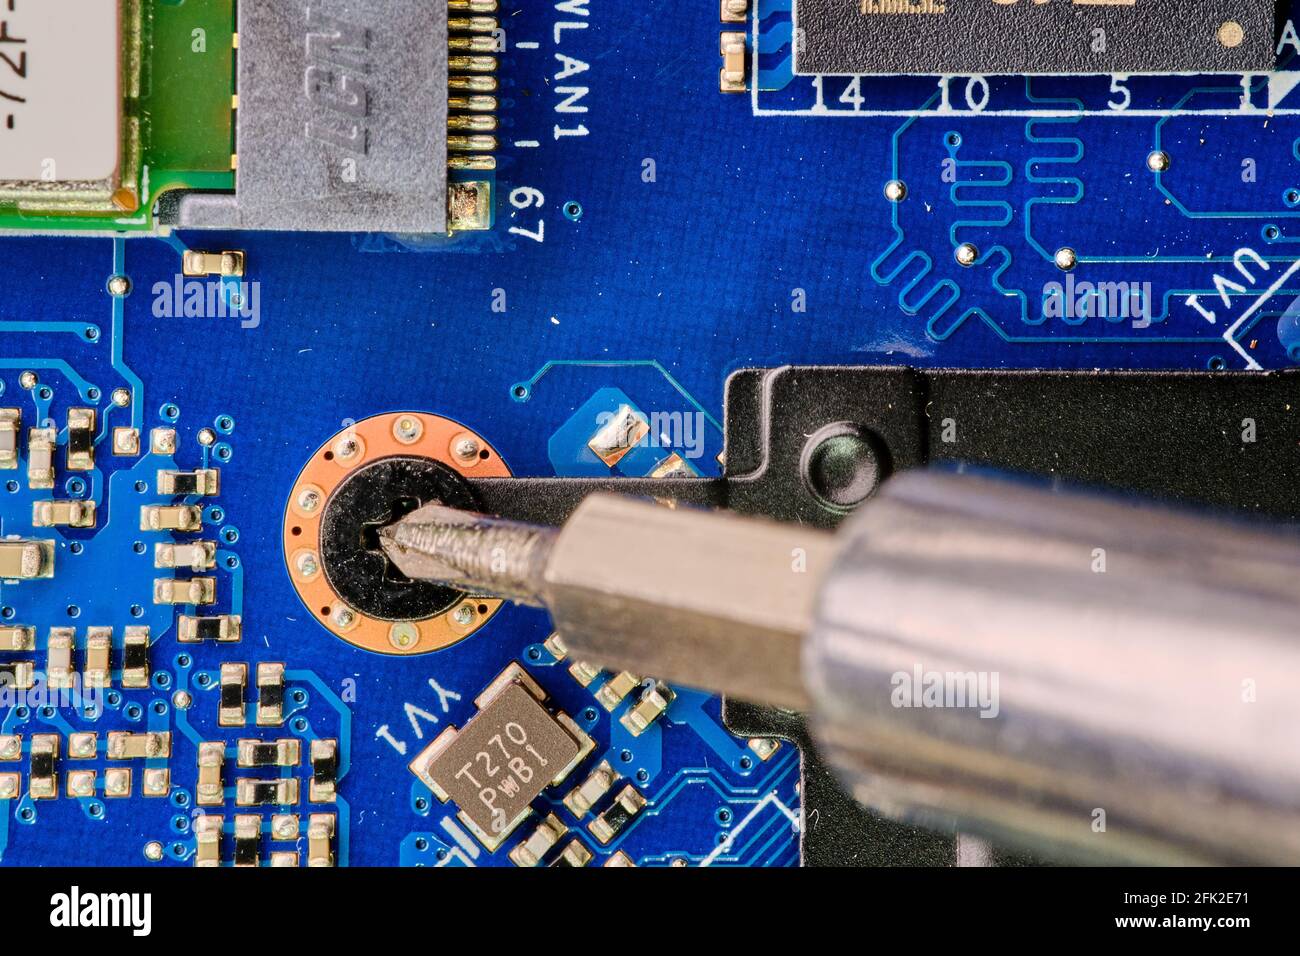 macro and closeup photos about microchips, processors, motherboard, inside an electronic device, a computer, notebook Stock Photo